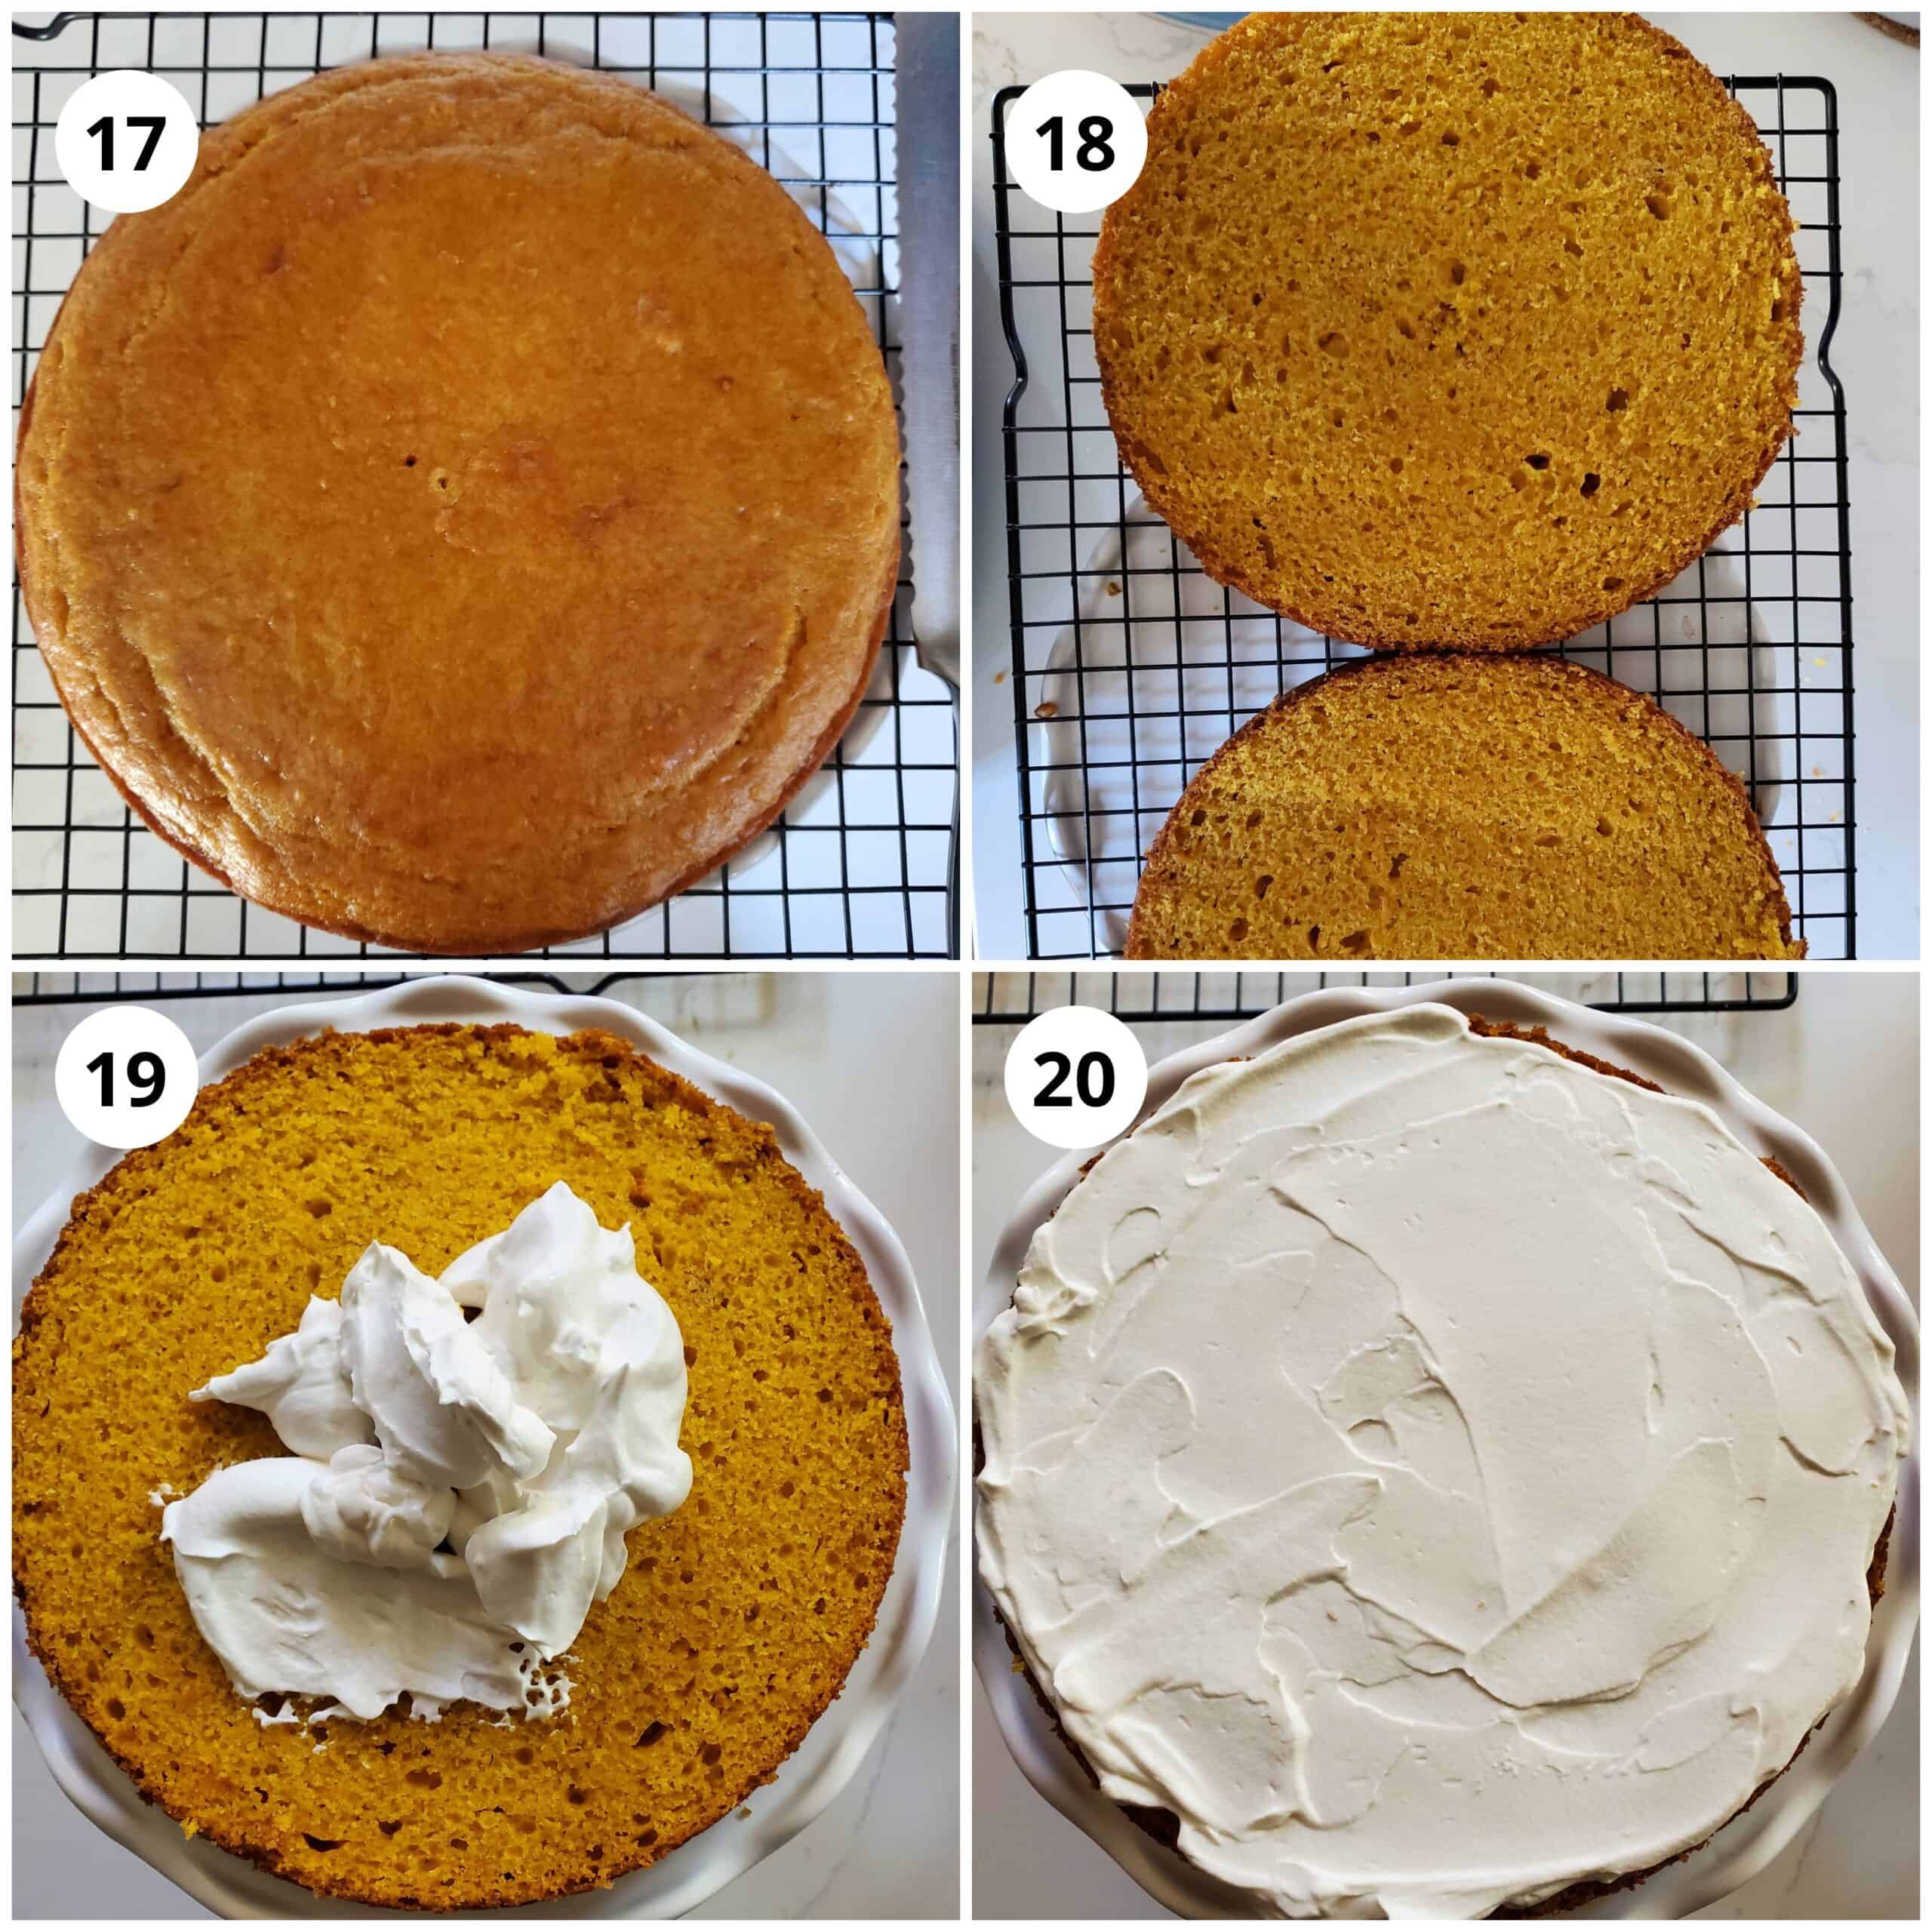 To assemble cake, cut it in half horizontally and add whipped cream to bottom layer and spread. 